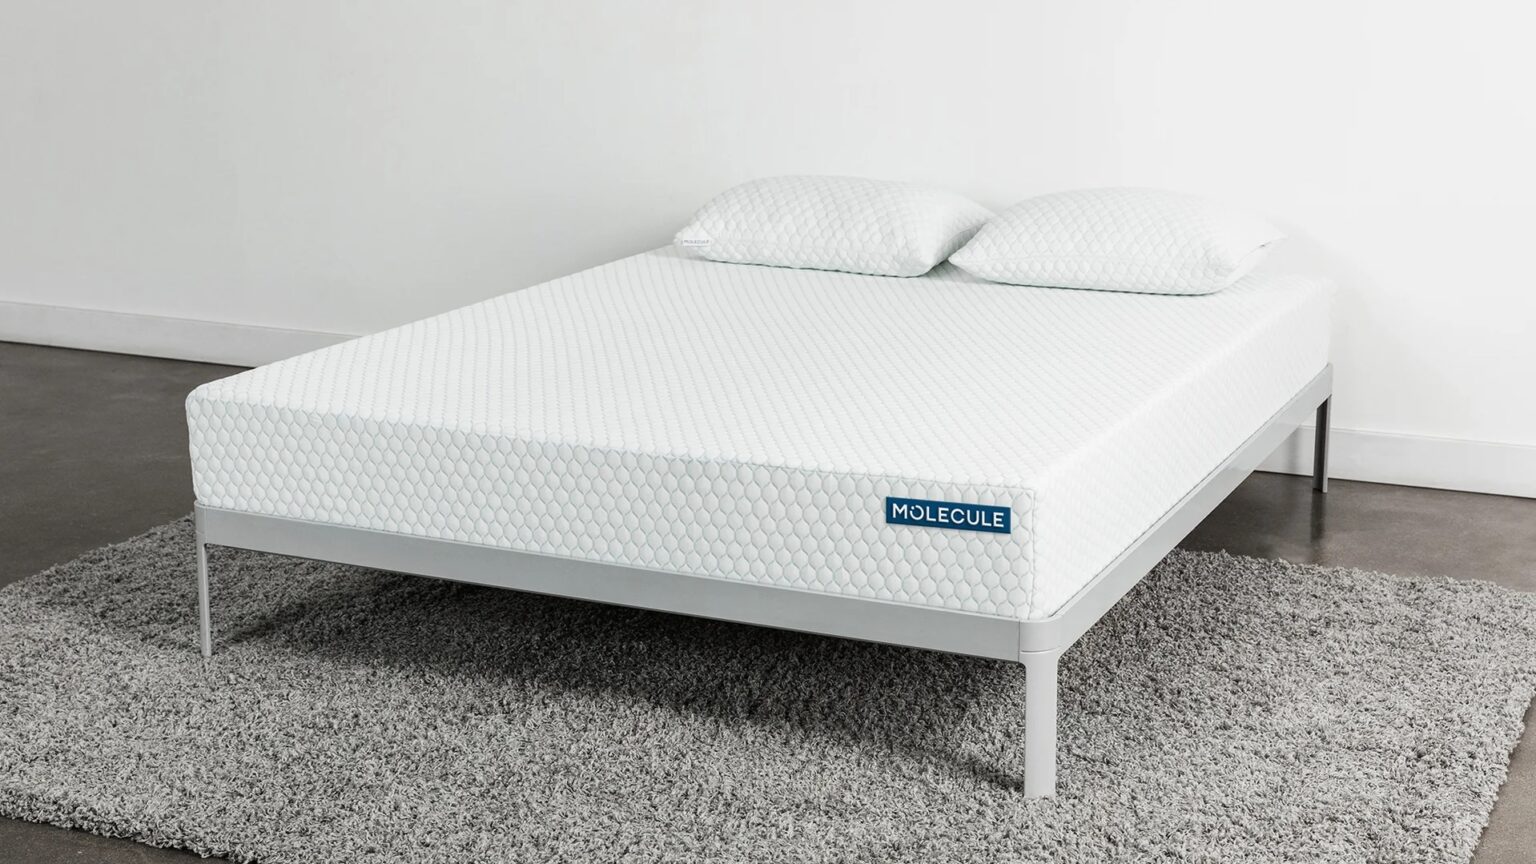 Product page photo of the Molecule Core Mattress